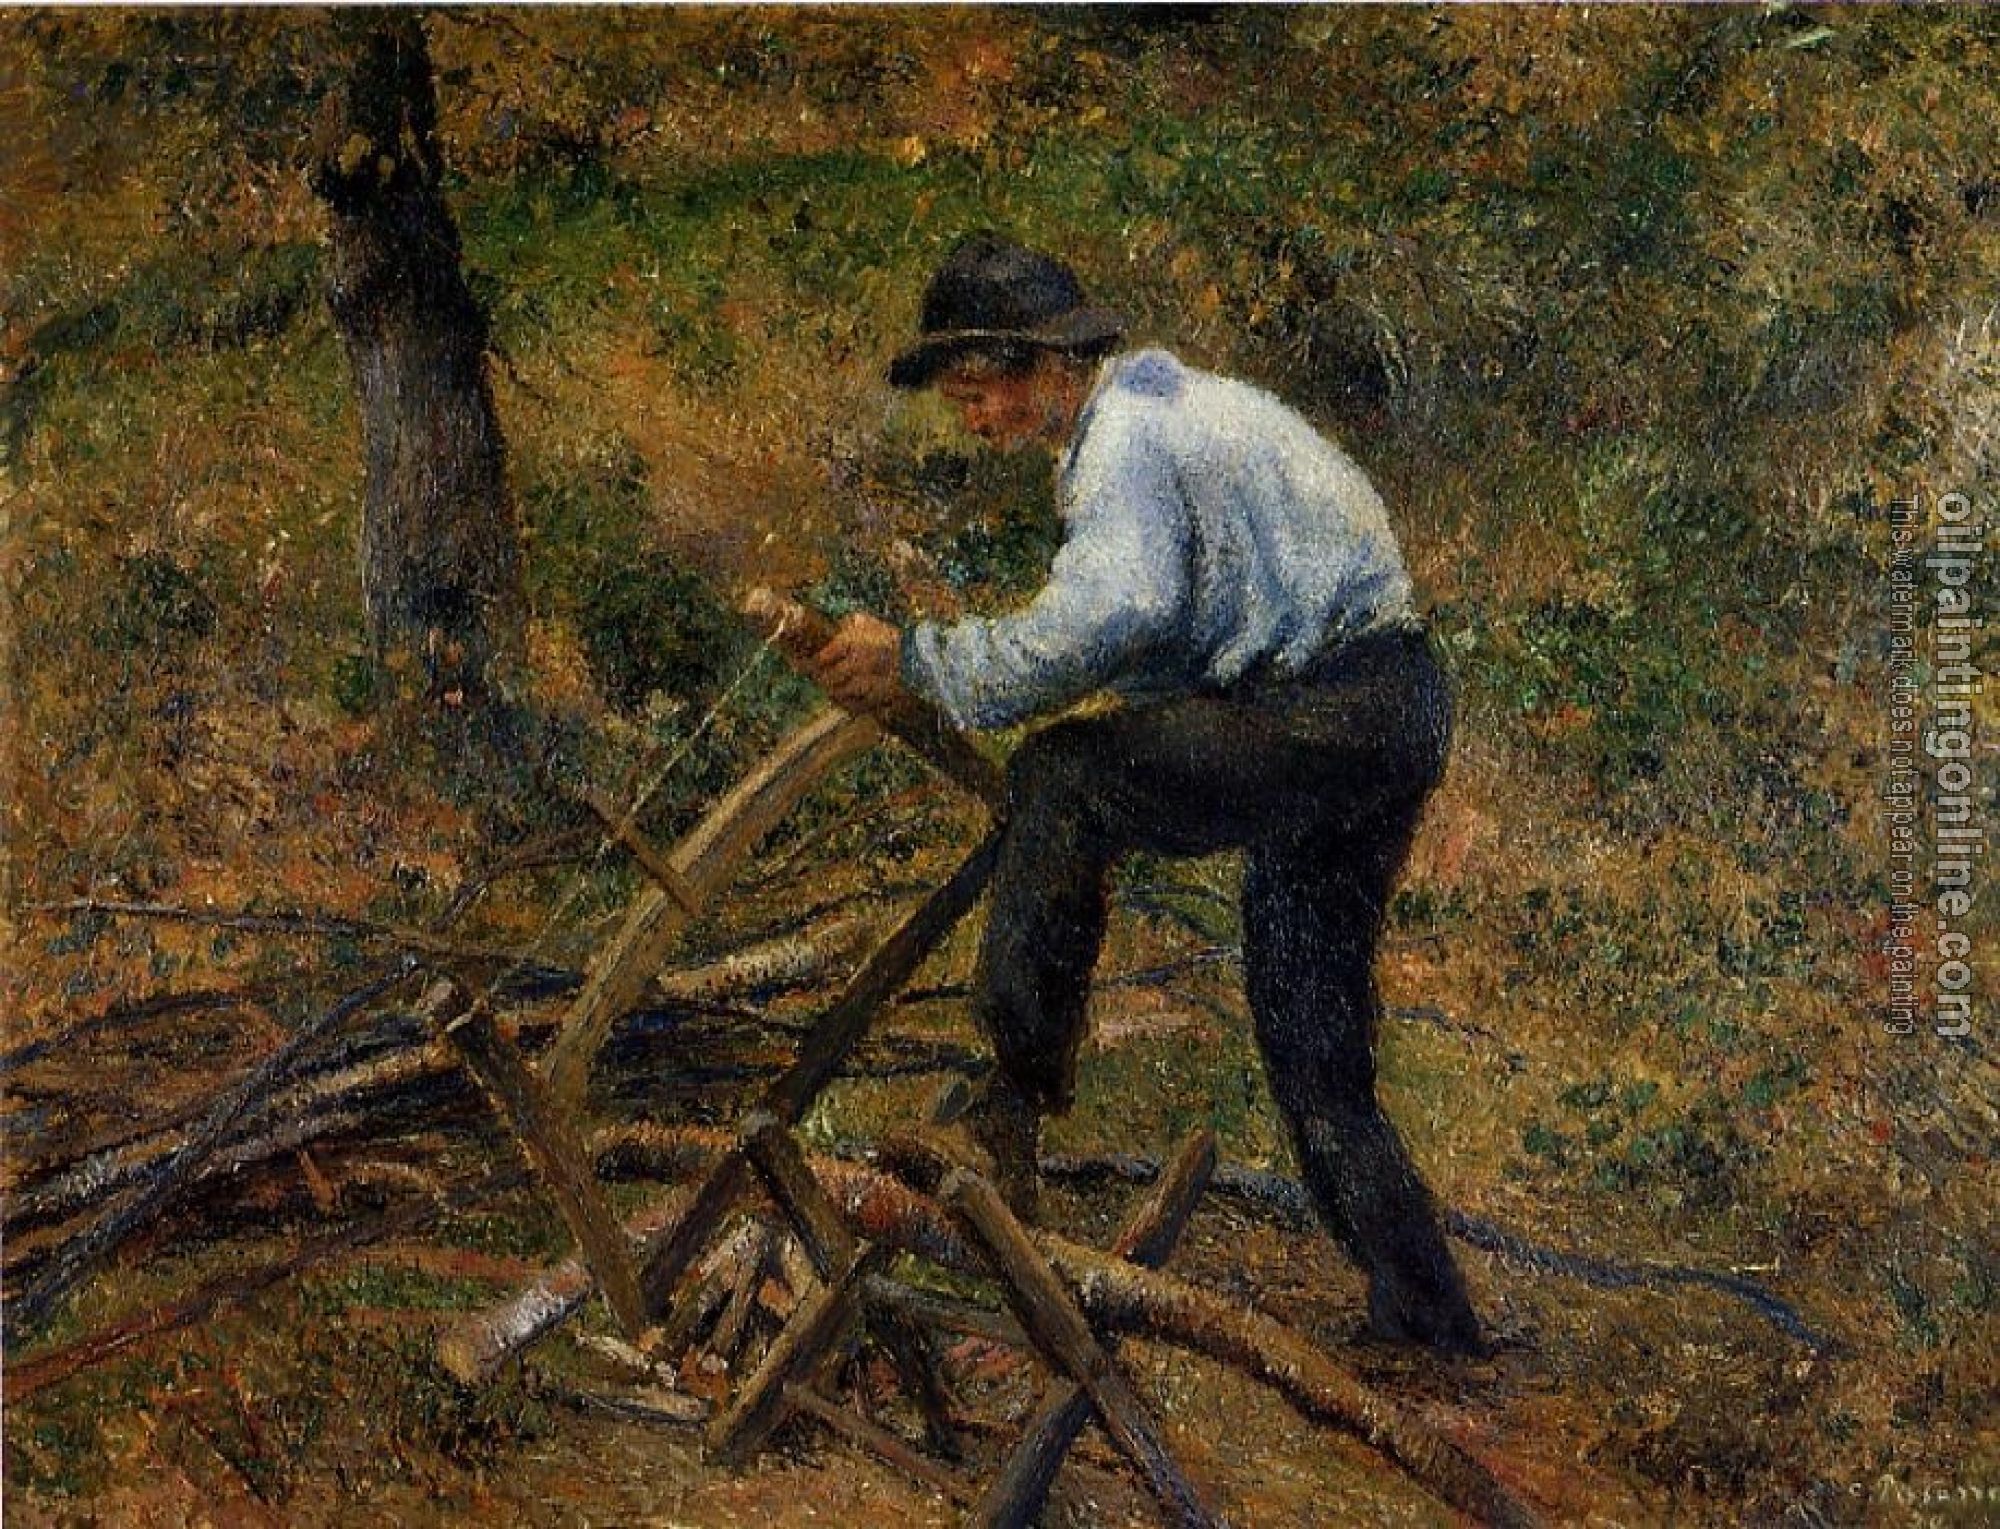 Pissarro, Camille - Pere Melon Sawing Wood